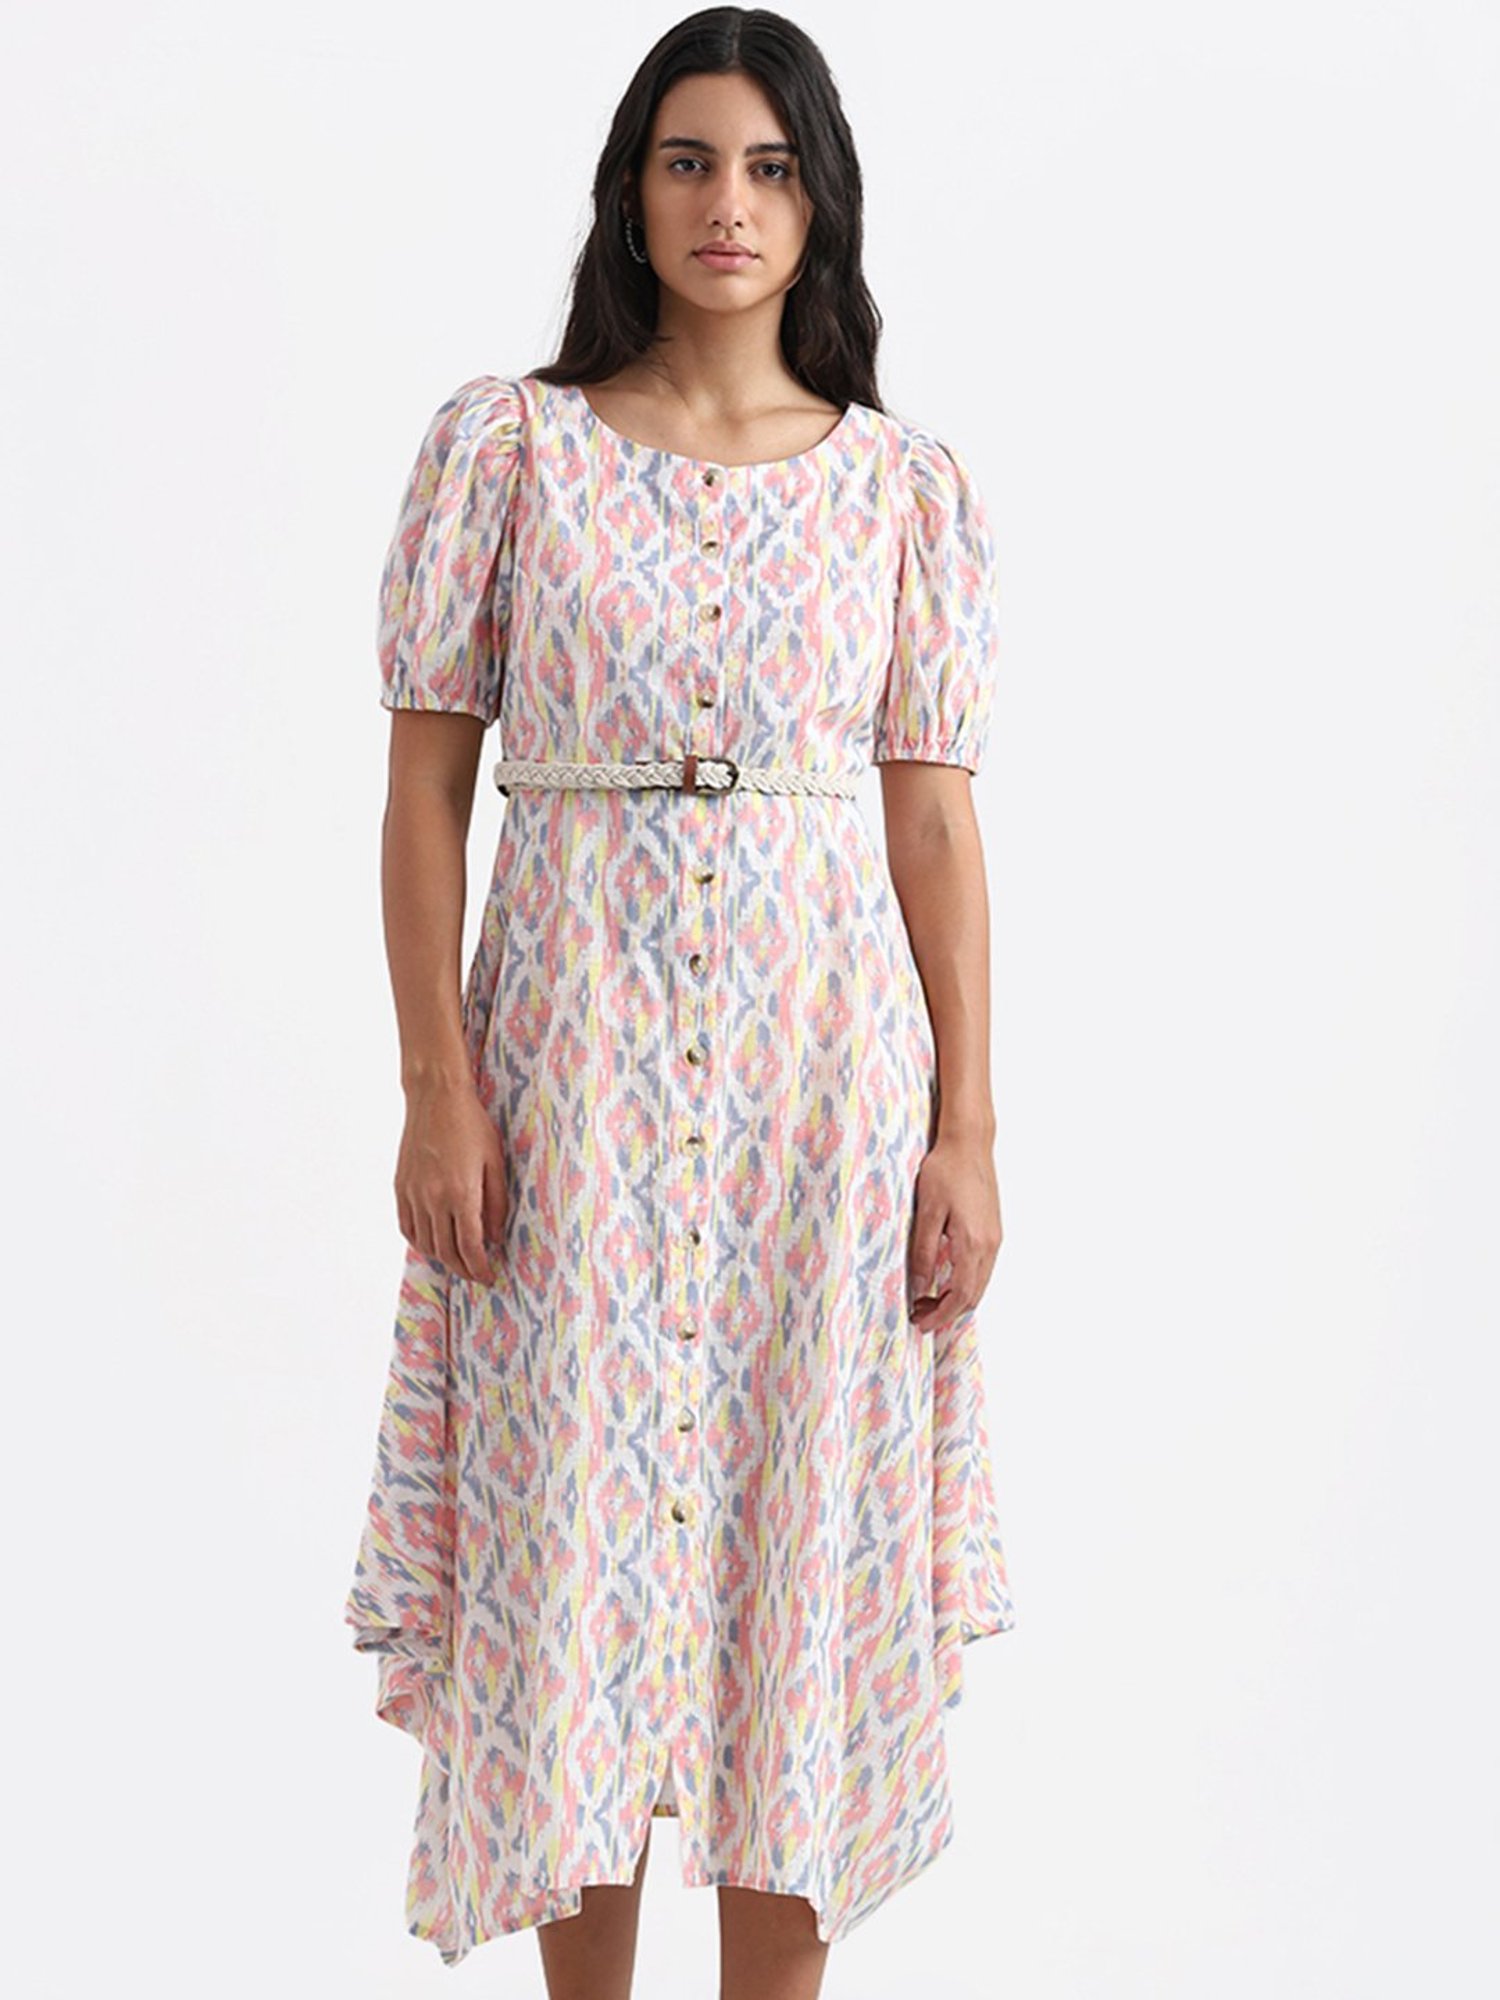 Bombay Paisley by Westside Red Floral Printed Dress with Braided Belt